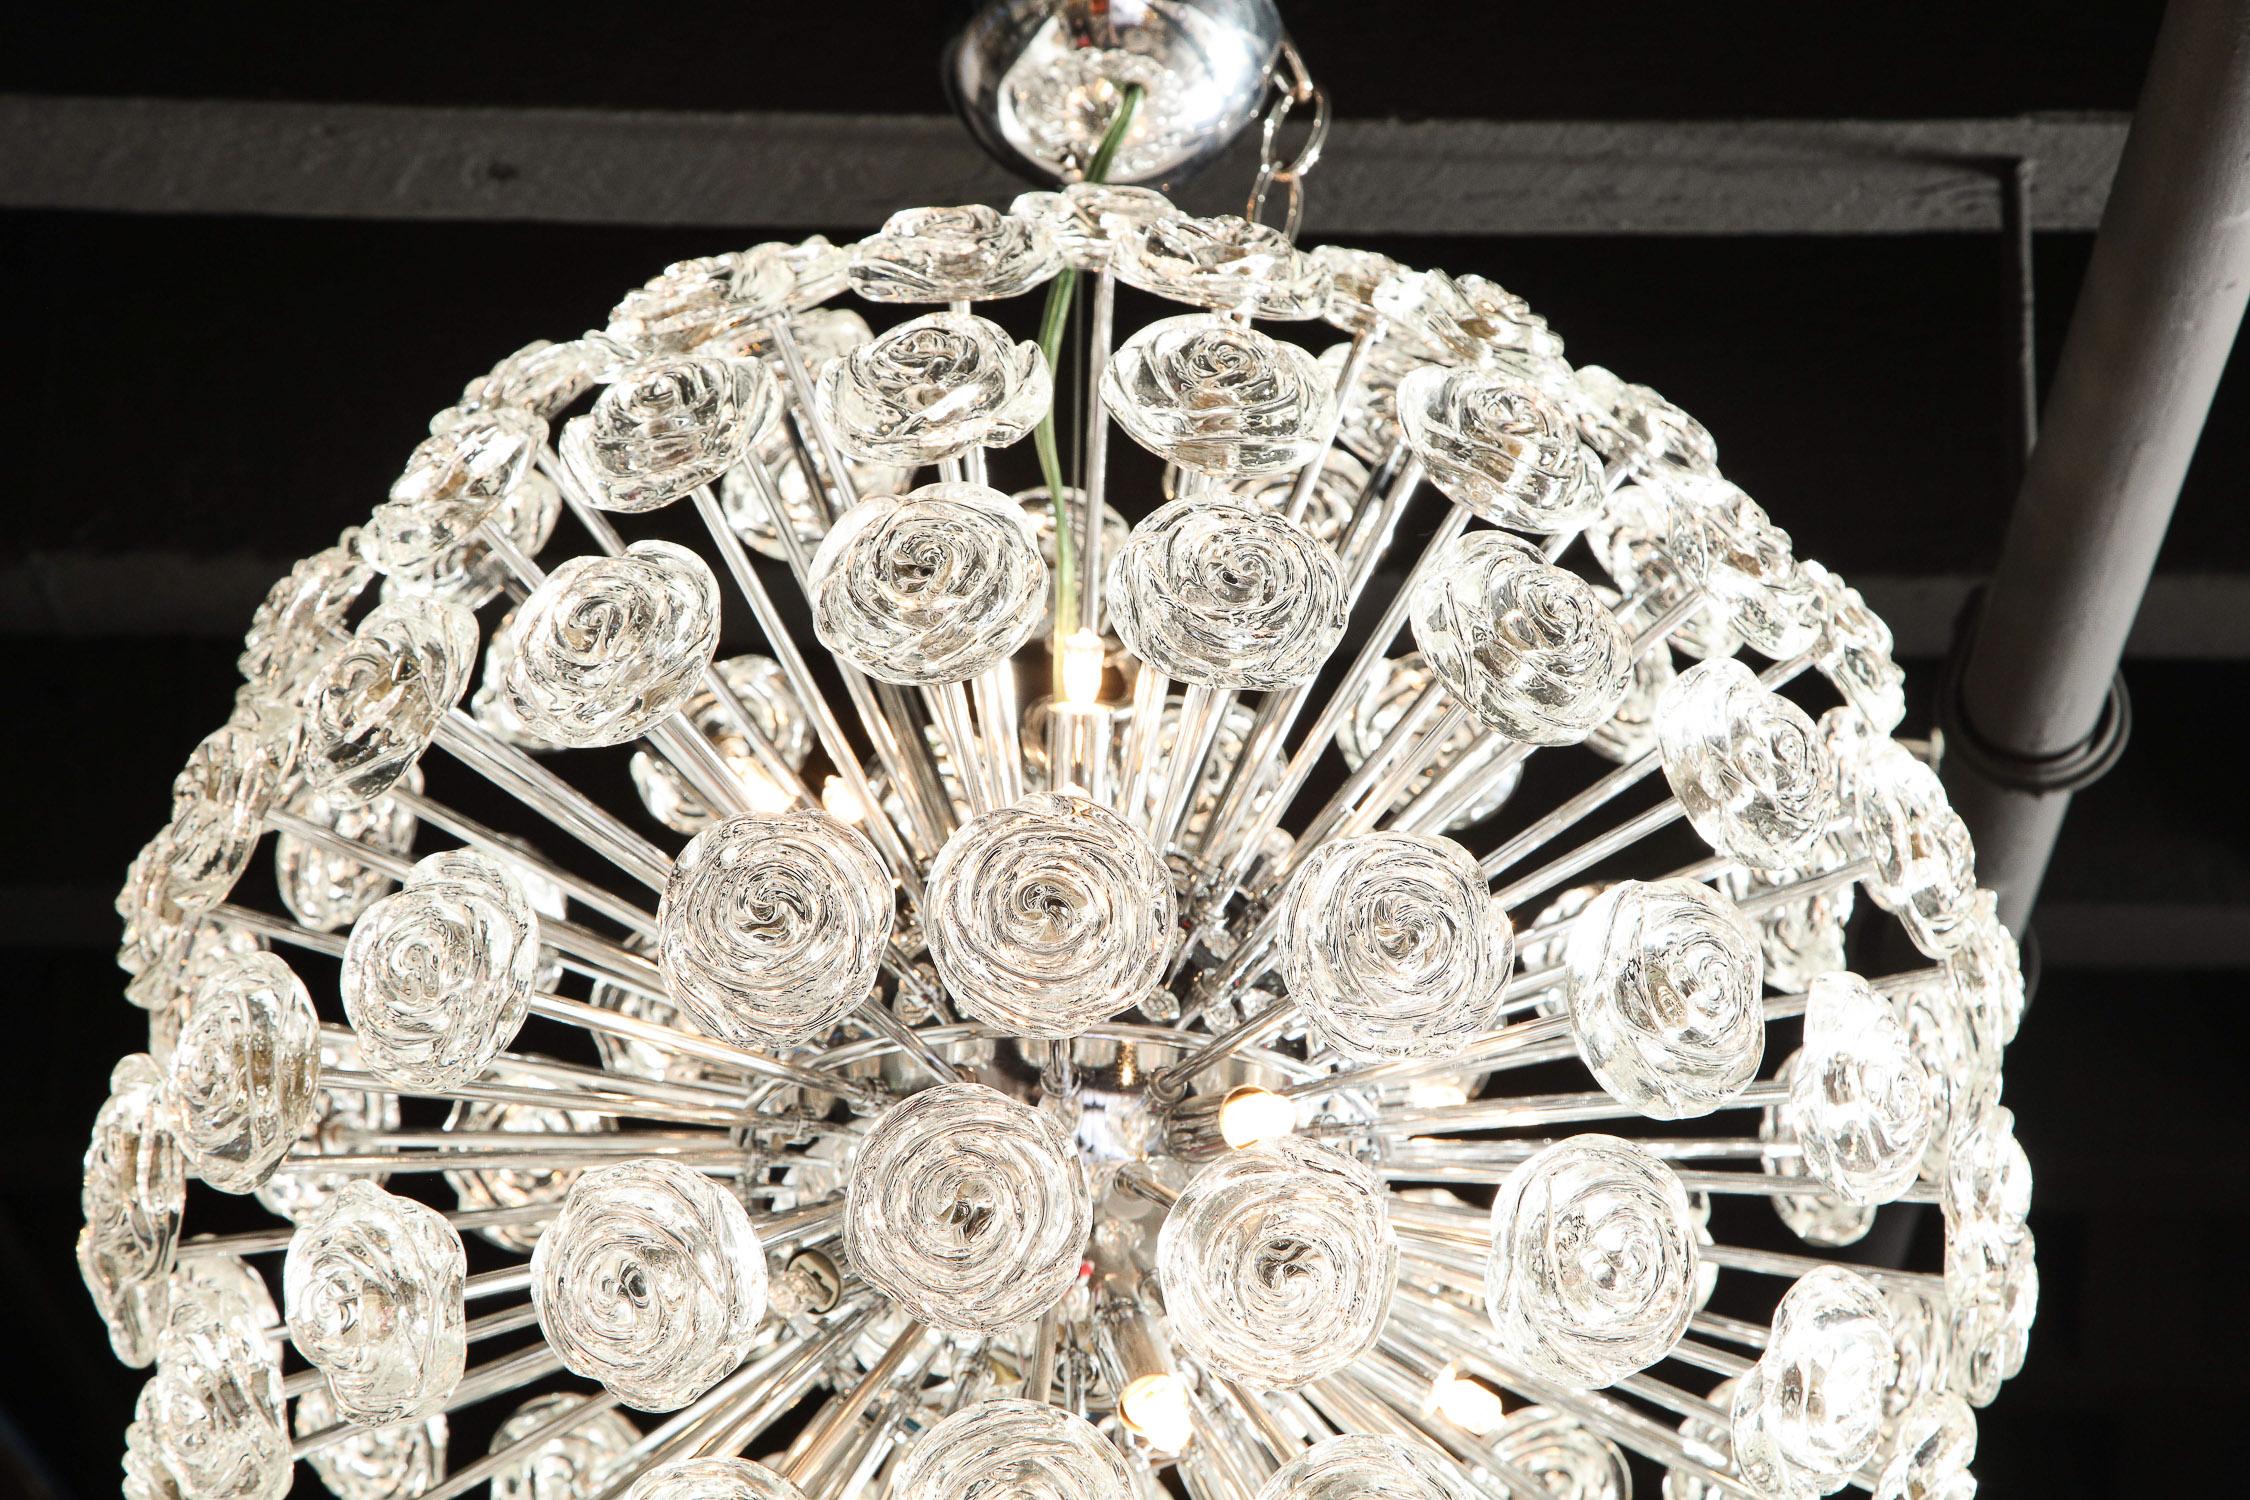 Hand-Crafted Chandelier with Glass Roses, Midcentury Design, Italy, Large Chrome Sphere For Sale